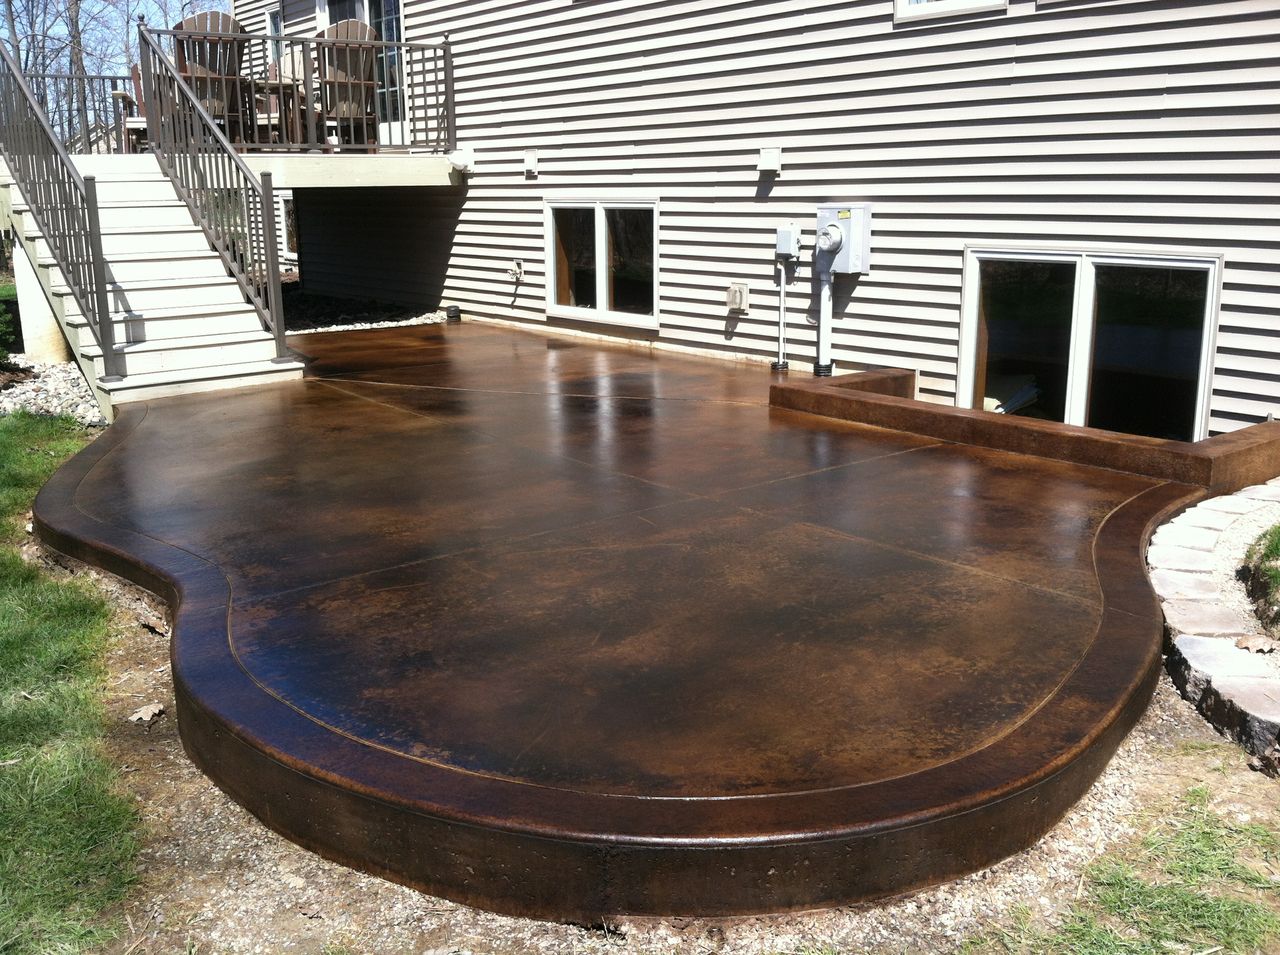 How Much Does It Cost To Stain A Concrete Patio?